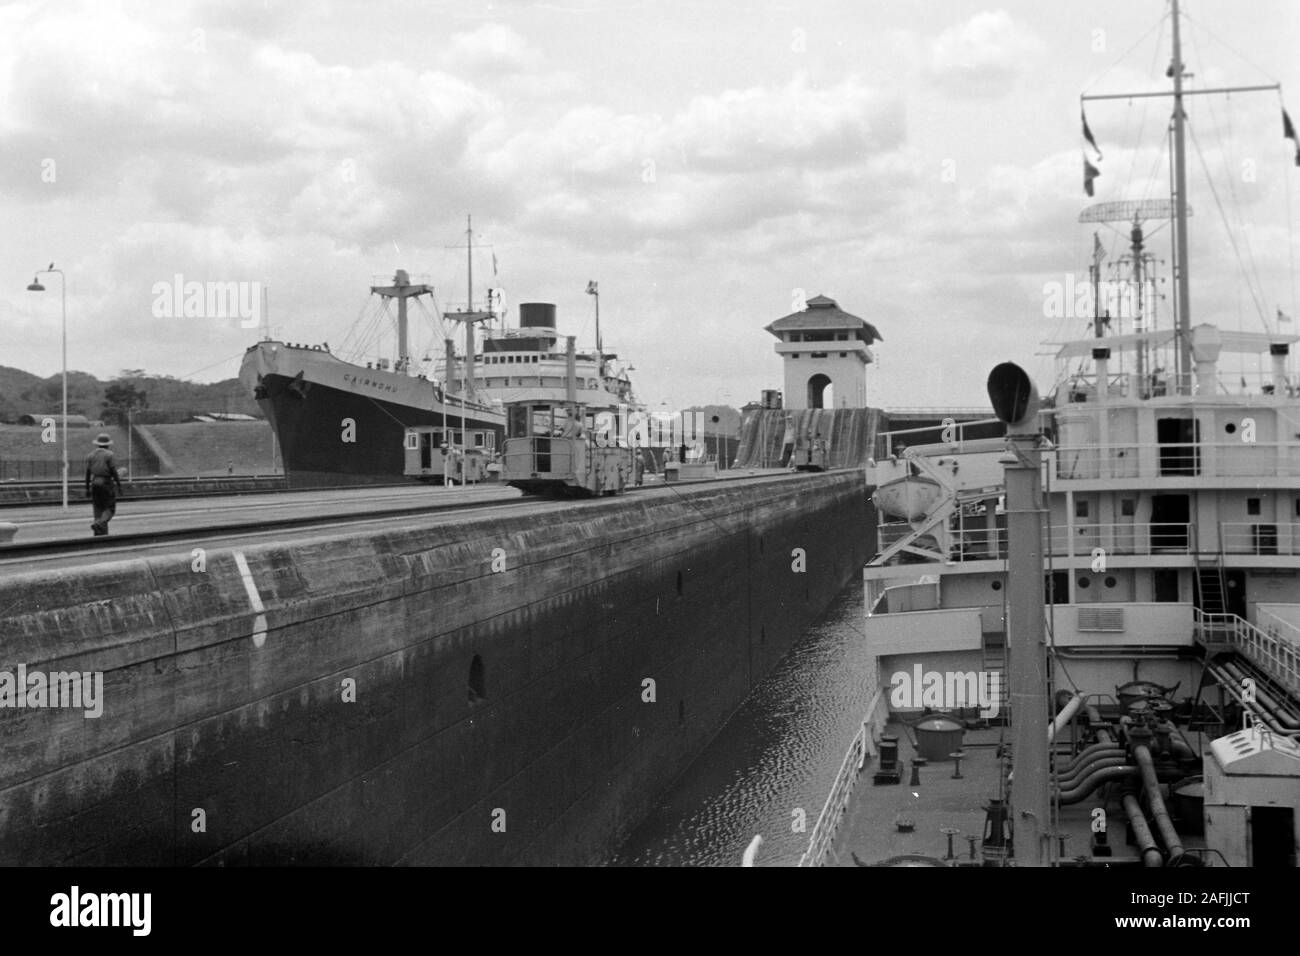 Schiffe an den Miraflores Schleusen im Zugang zum Pazifischen Ozean, nahe Panama-Stadt, Panama, 1955. Ships and vessels at the Miraflores locks of the Panama Canal with entry to the Pacific Ocean, Panama, 1955. Stock Photo